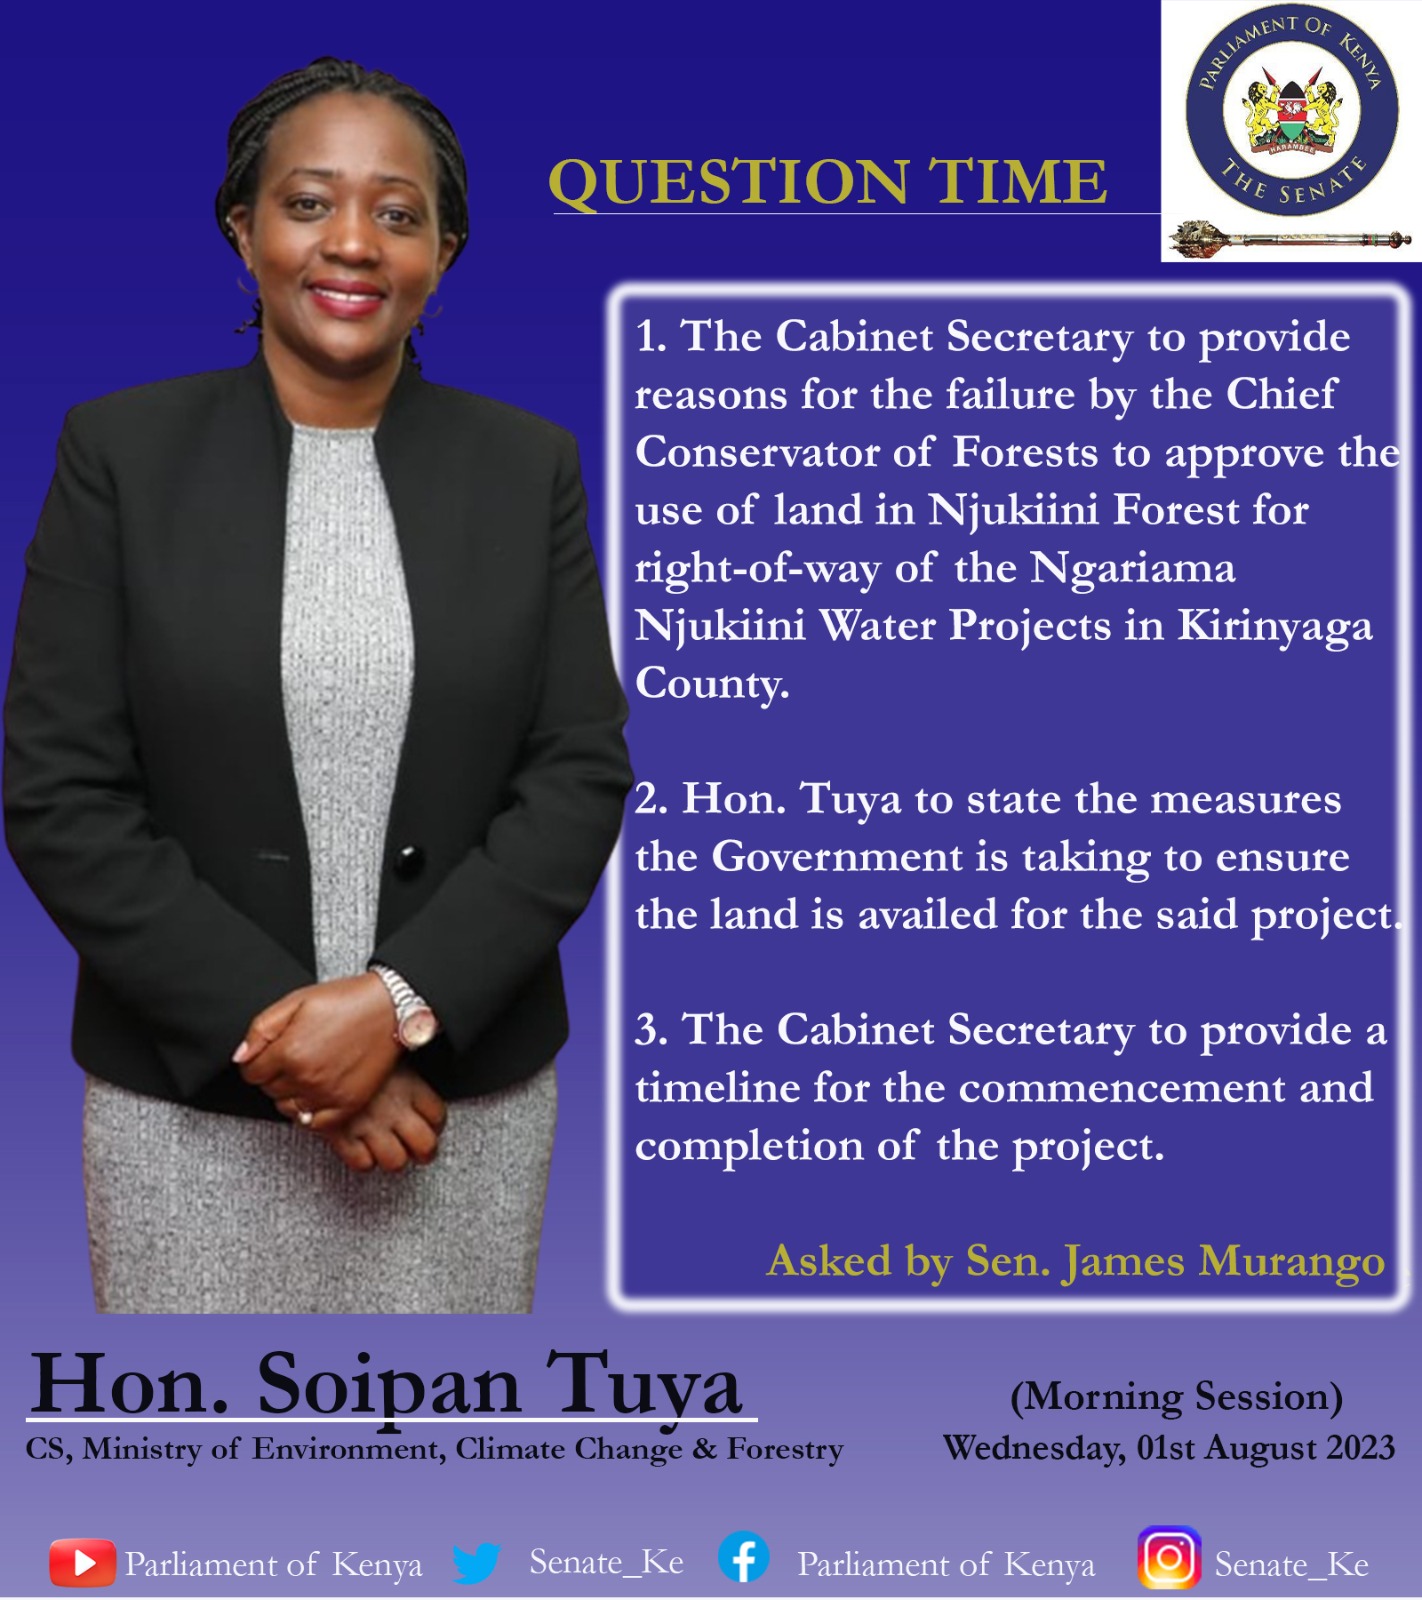 QUESTION TIME: Hon. Soipan Tuya - CS, Ministry of Environment, Climate Change and Forestry 